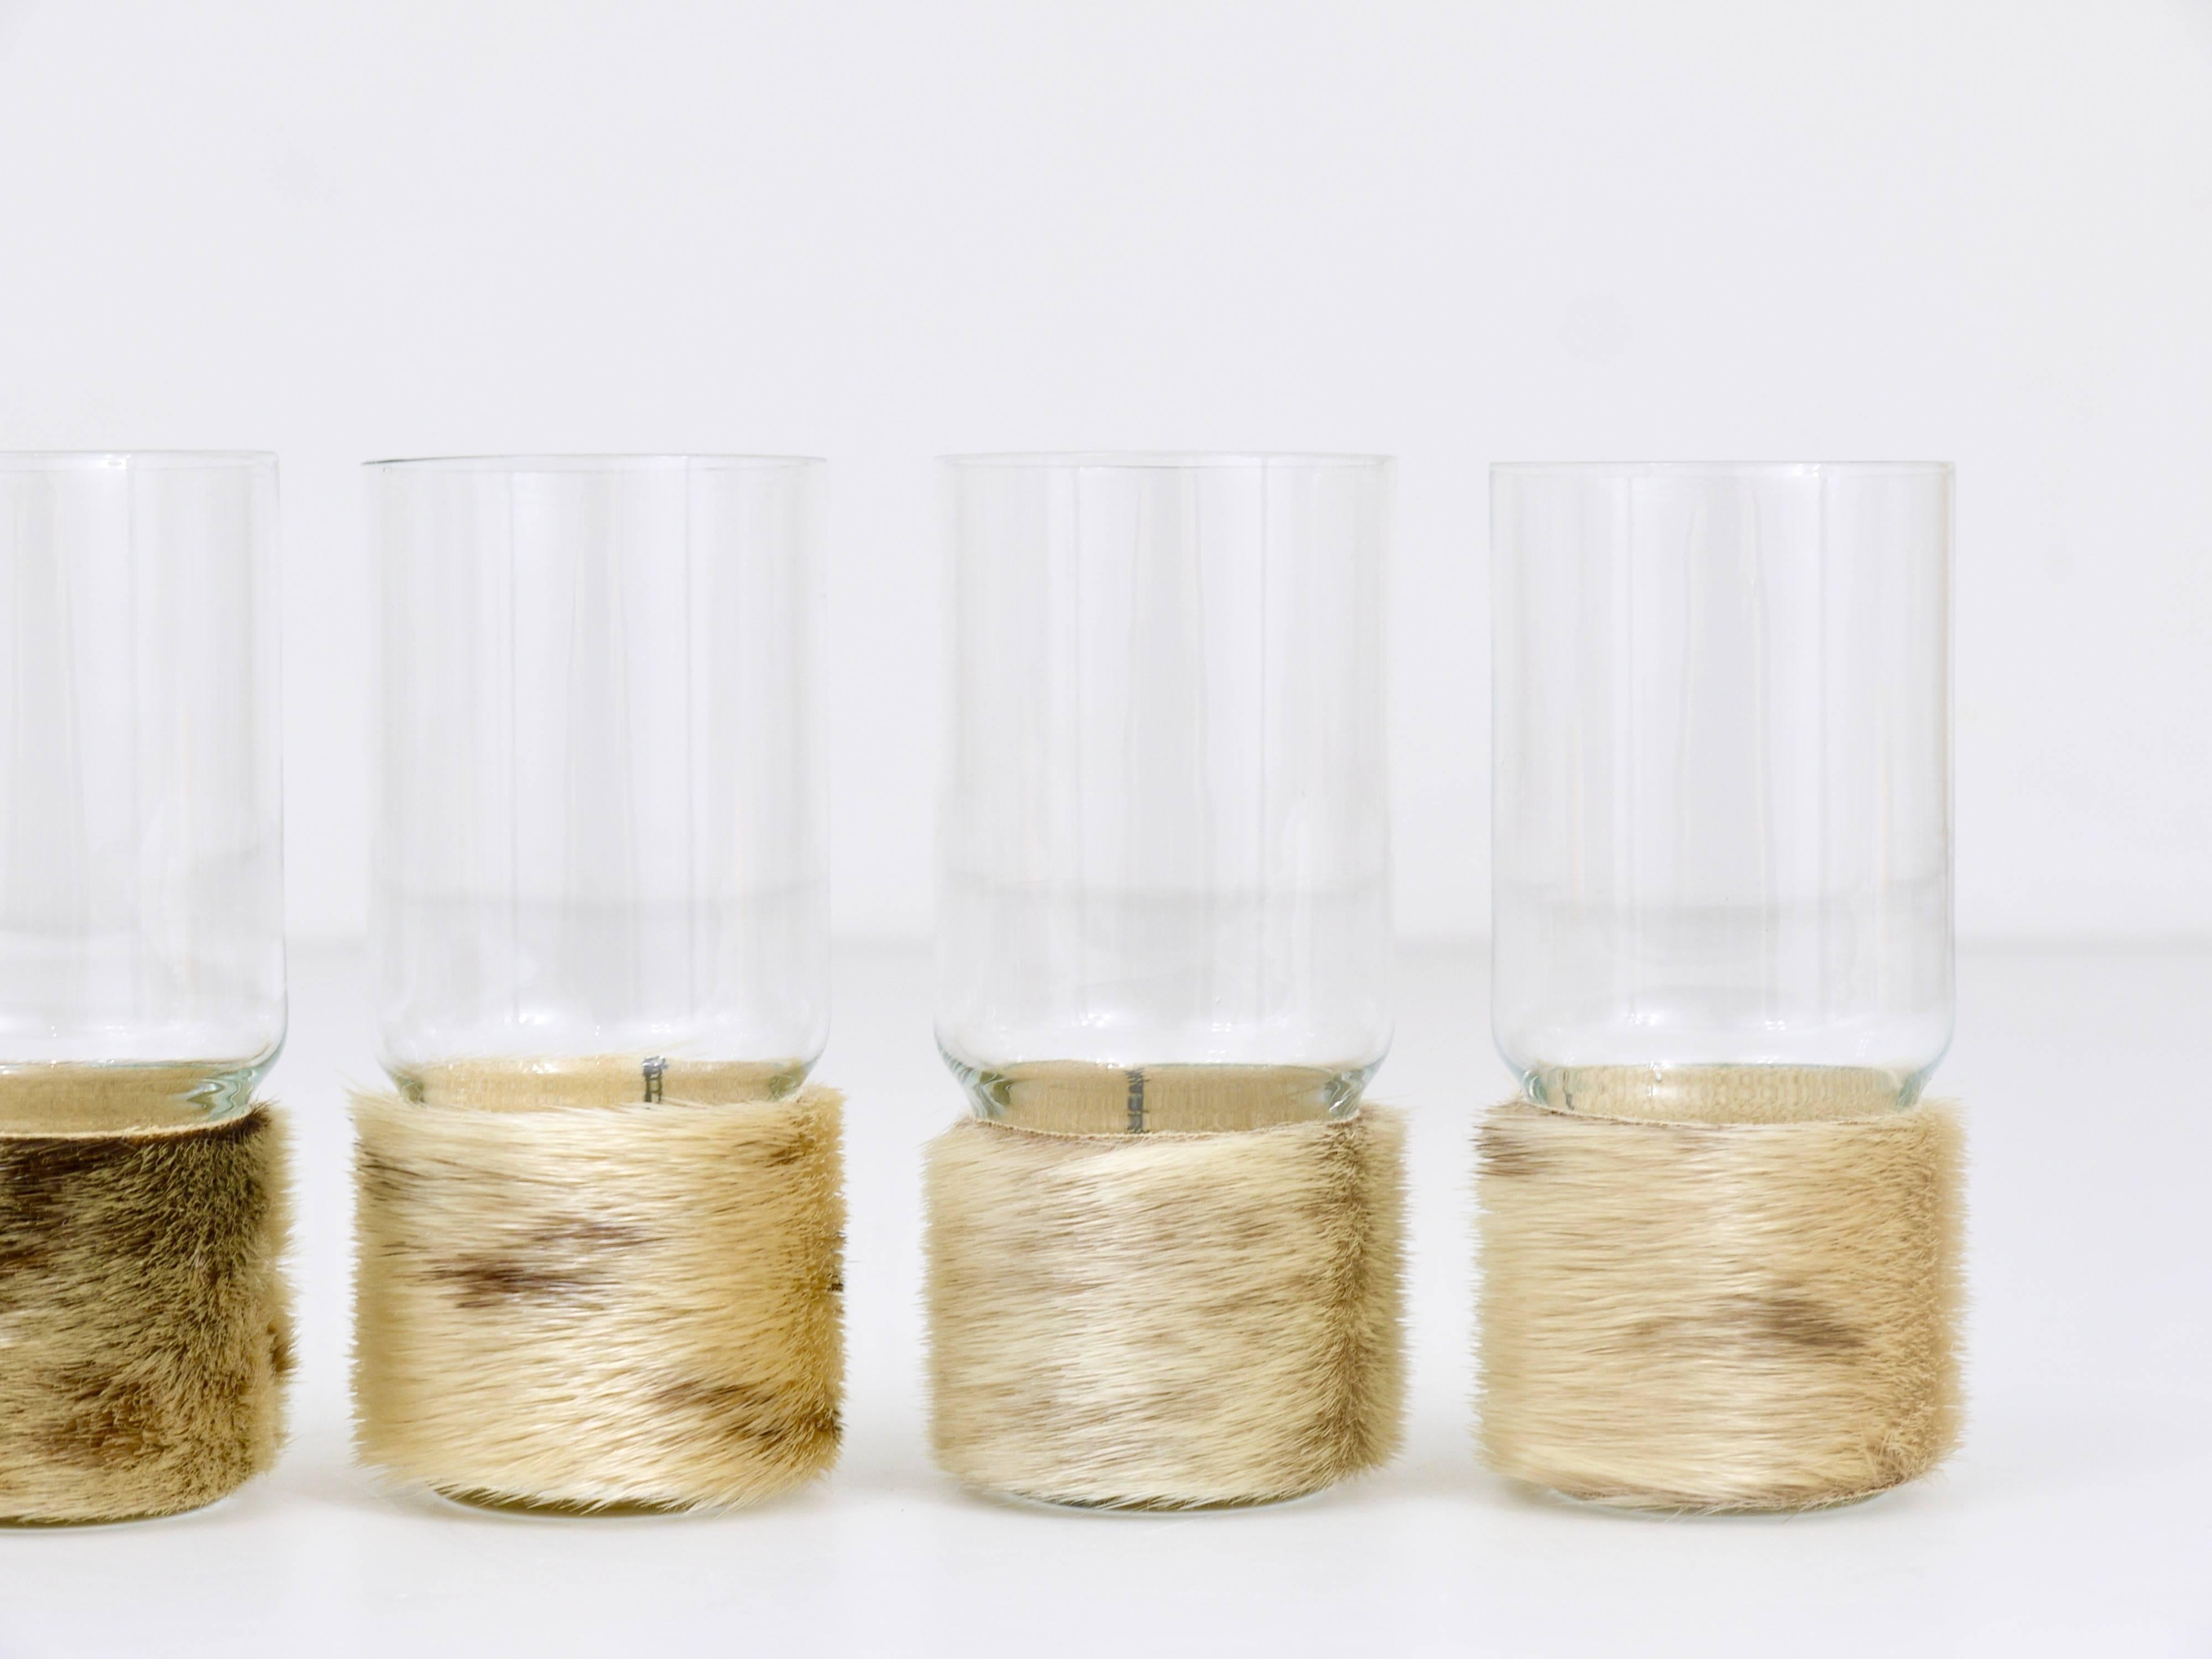 A set of six beautiful modernist drinking glasses with bases wrapped in fur from the 1950s.  In excellent condition, unused, in its original box. We offer other similar drinking glasses, tableware and other design object in our other listings.